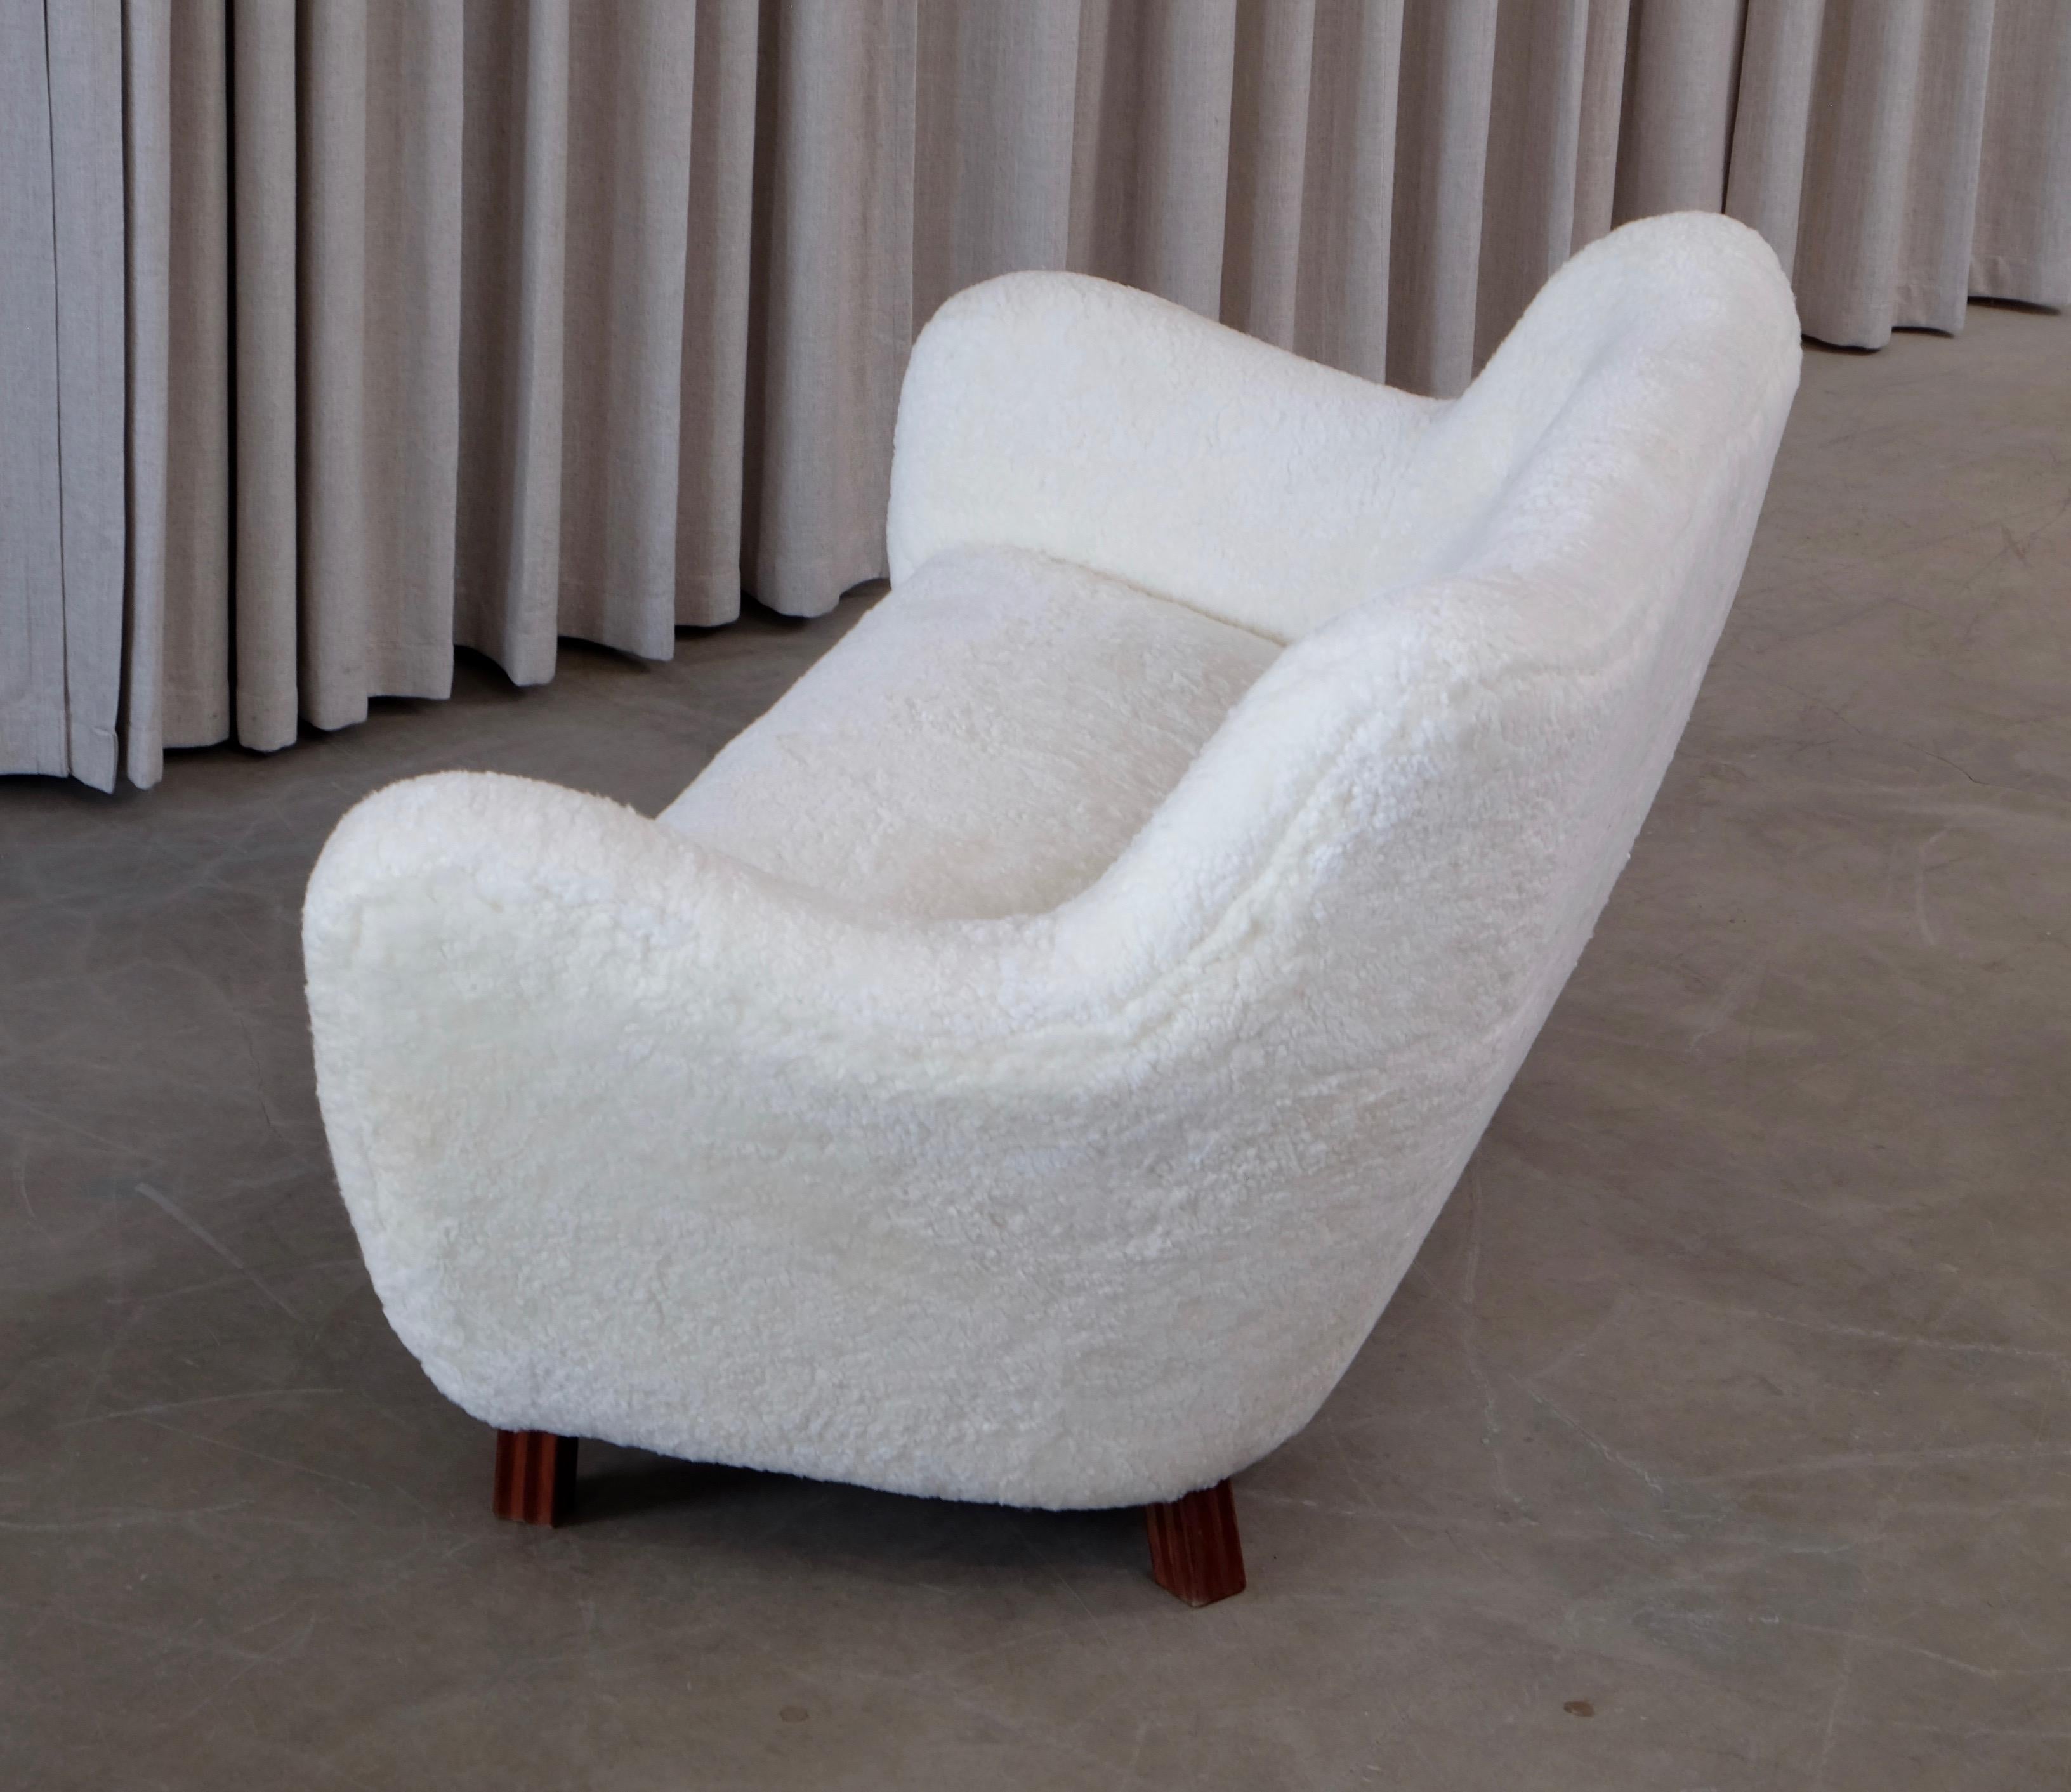 Re-upholstered in white sheepskin.
Produced by Sten Wicéns Möbelfabrik, Sweden, 1950s.
Pair of matching easy chairs of the same model also available.
Excellent condition.